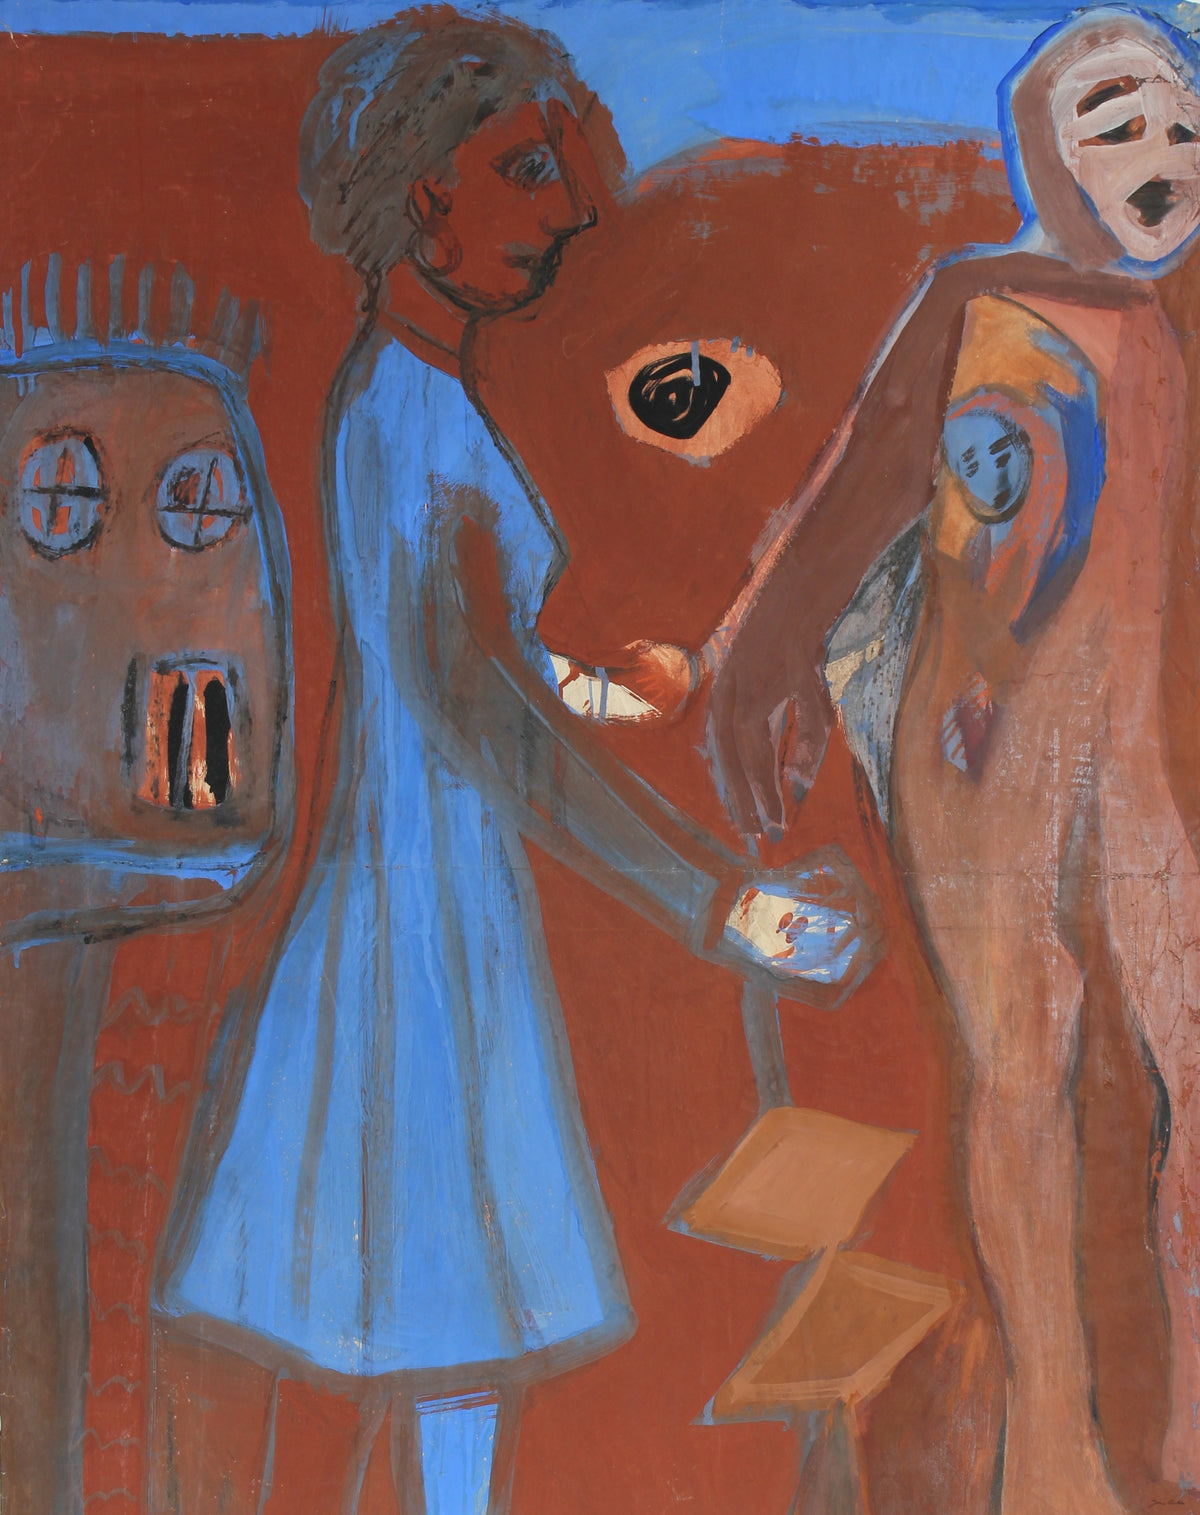 Expressionist Gouache Figures in Rust &amp; Blue&lt;br&gt;Mid-Late 20th Century&lt;br&gt;&lt;br&gt;#92531